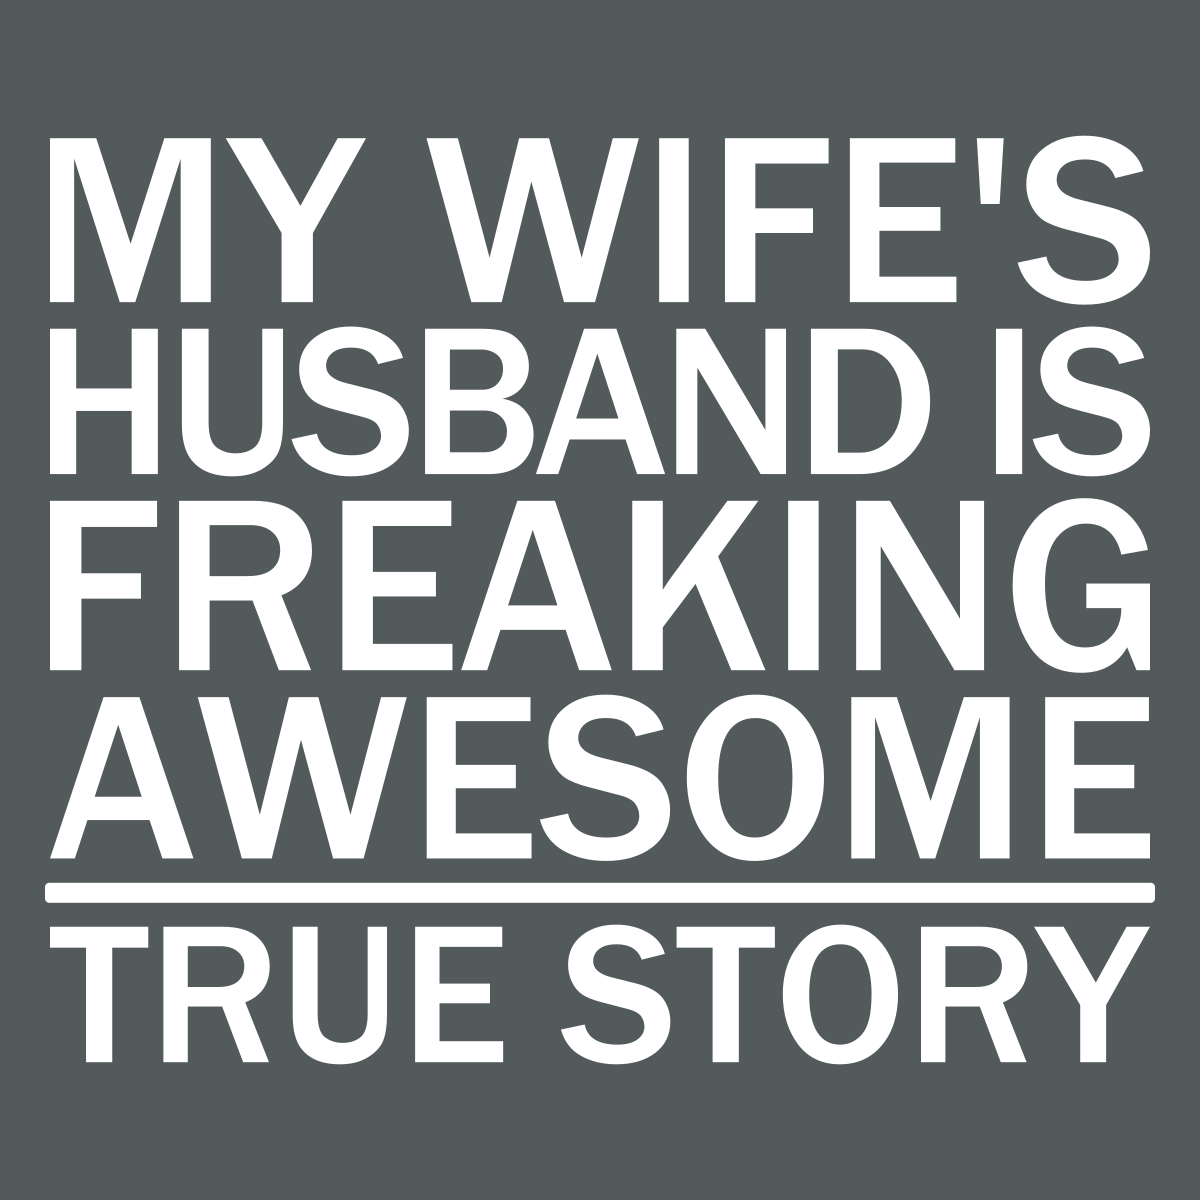 My Wife's Husband Is Freaking Awesome - True Story - Engineering Outfitters